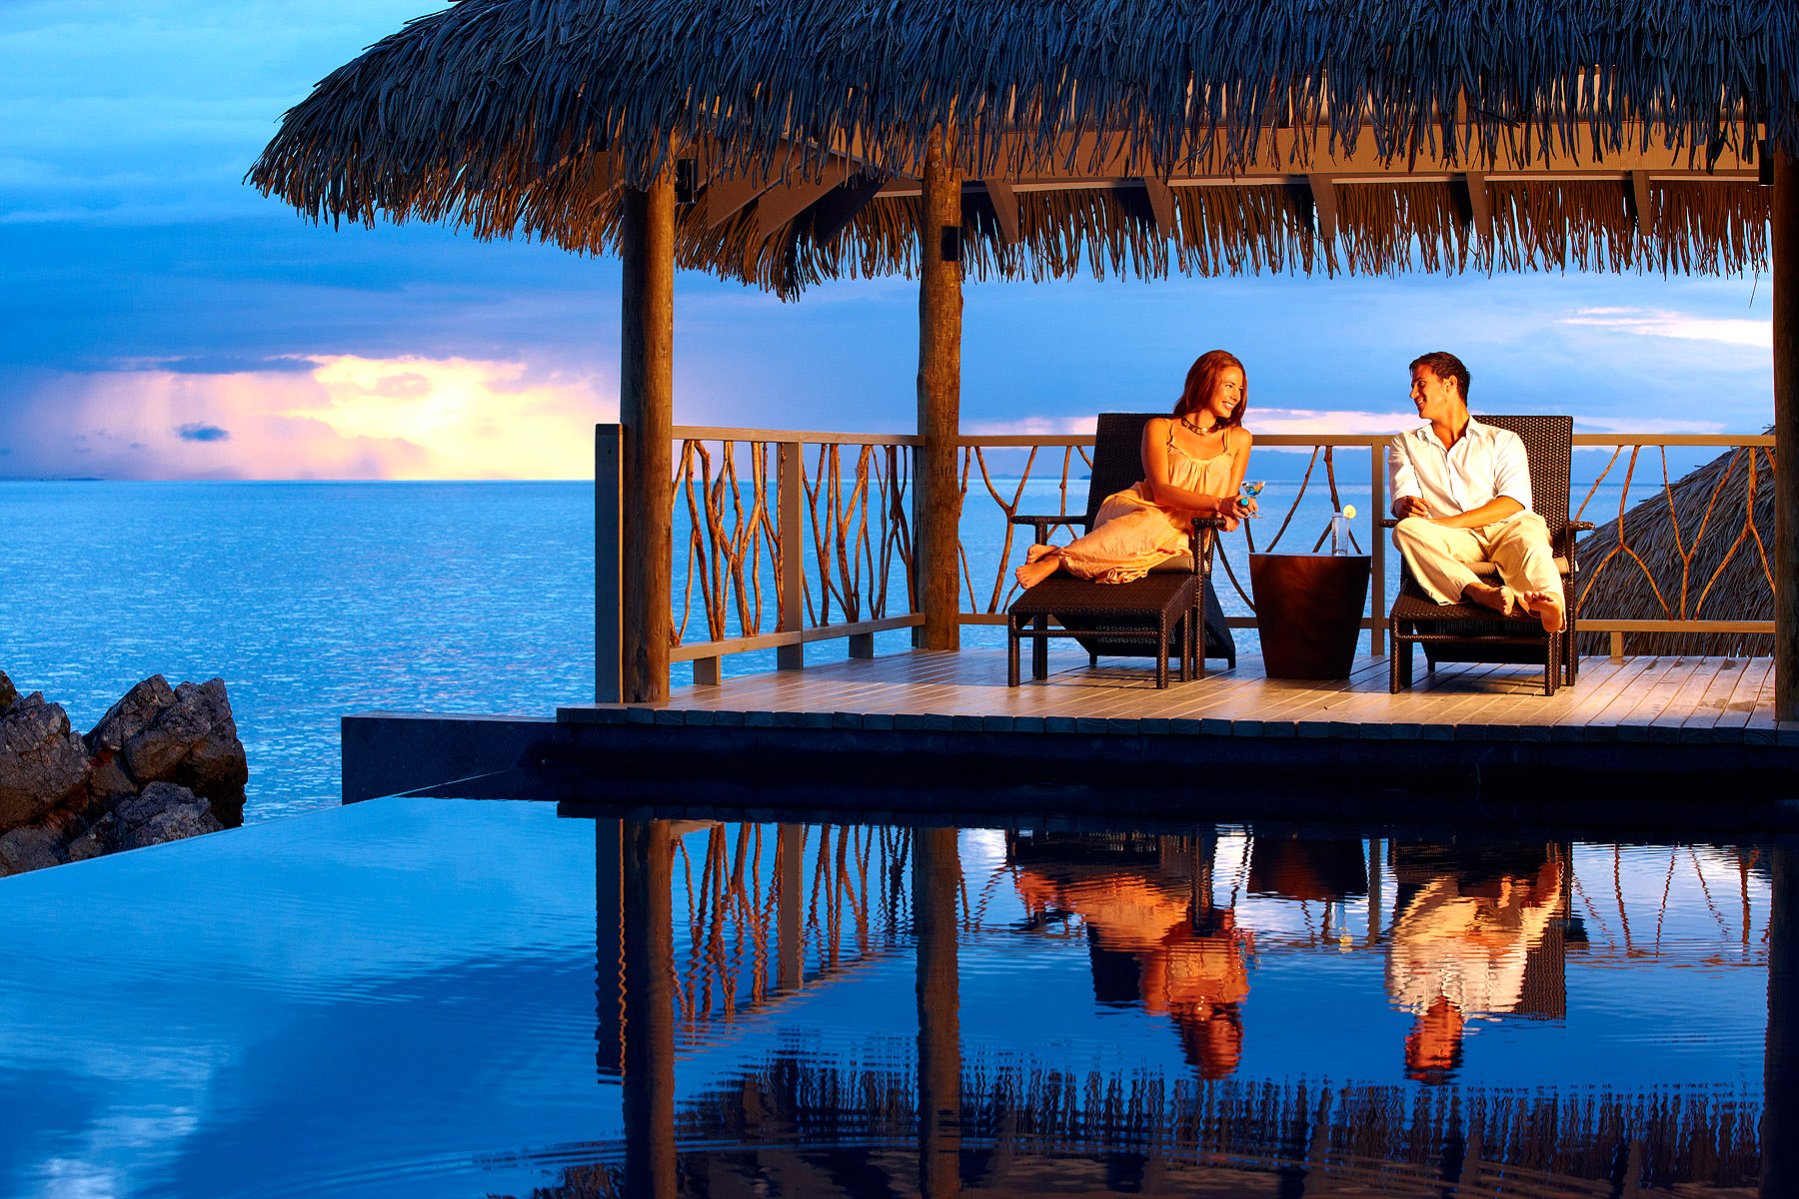 Honeymoon Destinations With Overwater Bungalows For A Romantic Getaway